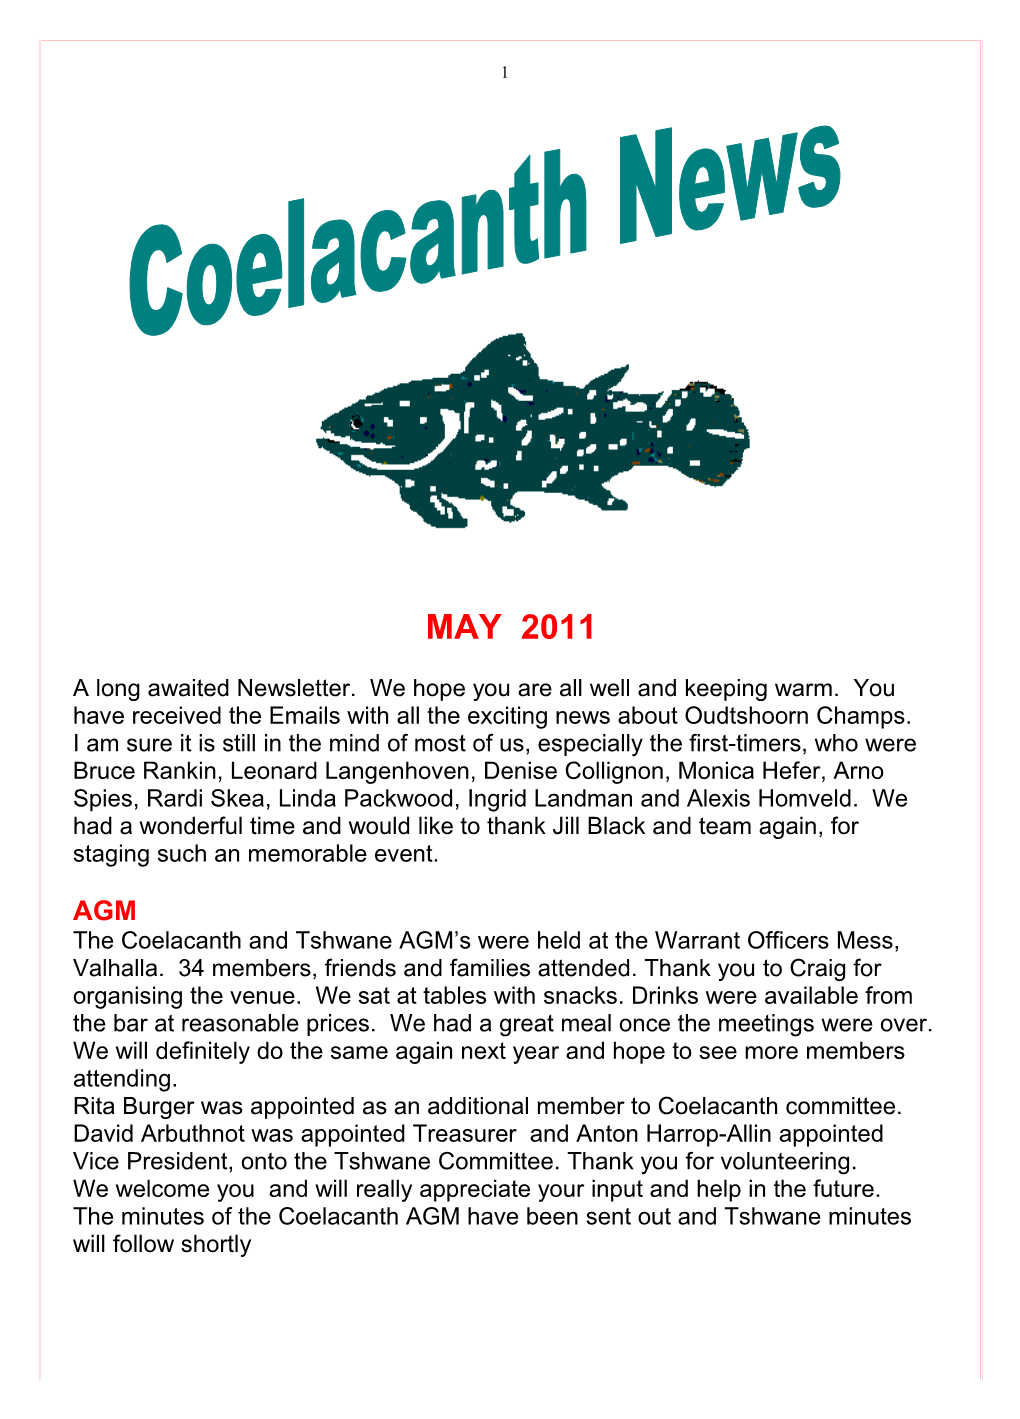 Rita Burger Was Appointed As an Additional Member to Coelacanth Committee